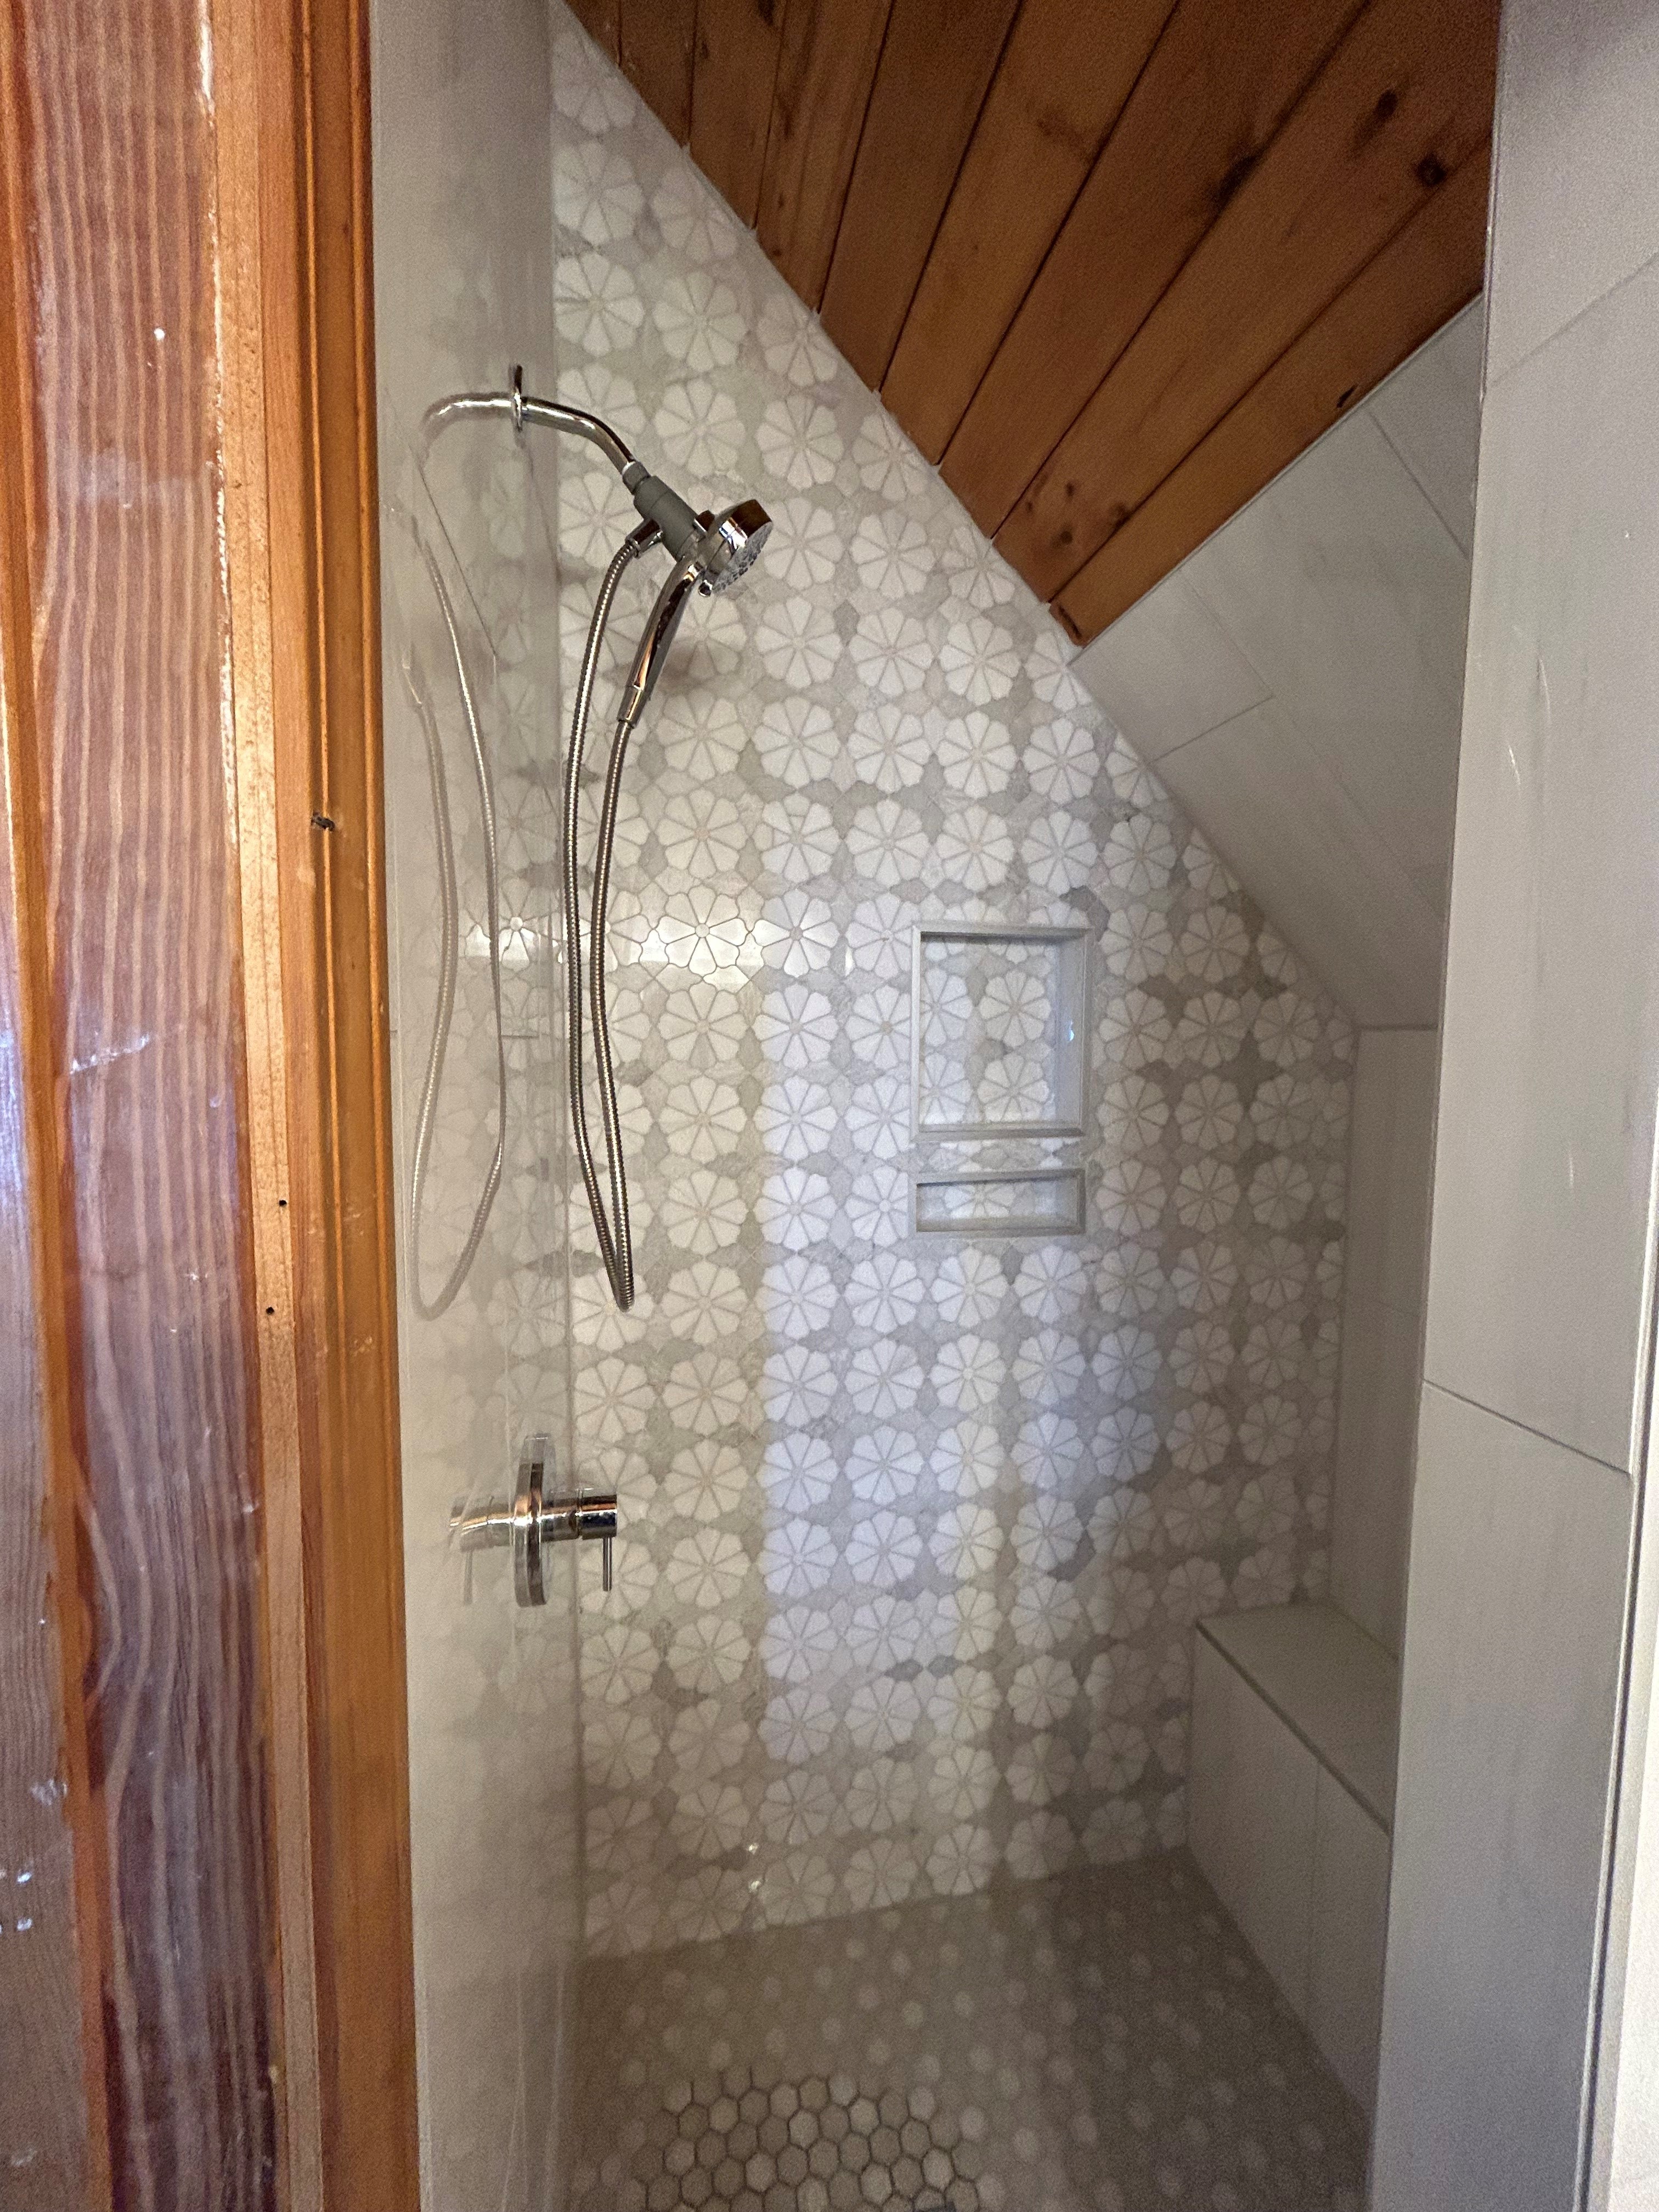 Second Floor Bath - shower only